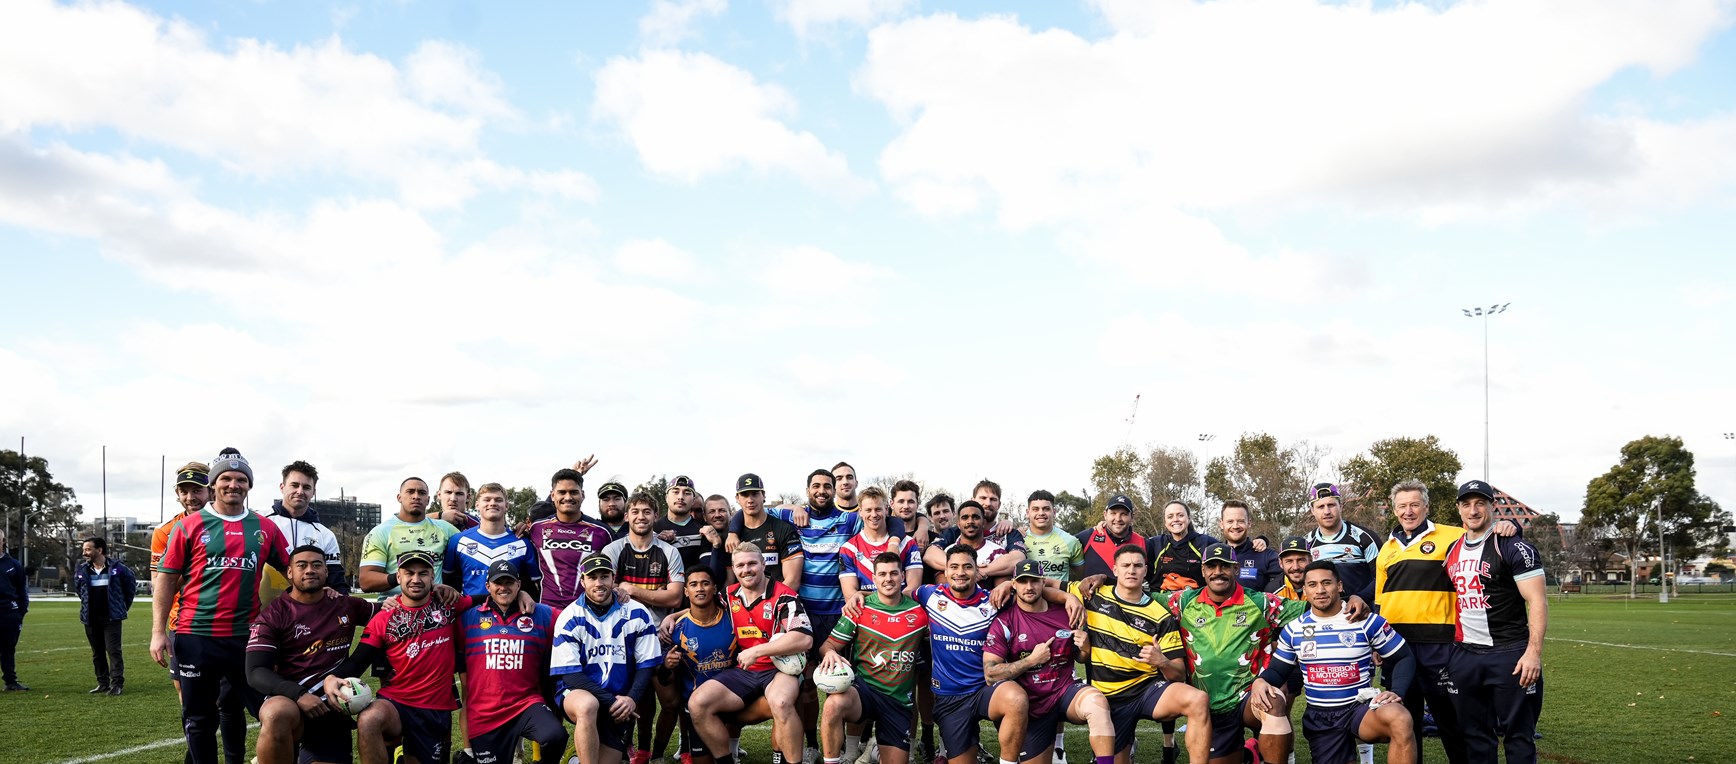 In Pictures: Junior Club Jersey Day